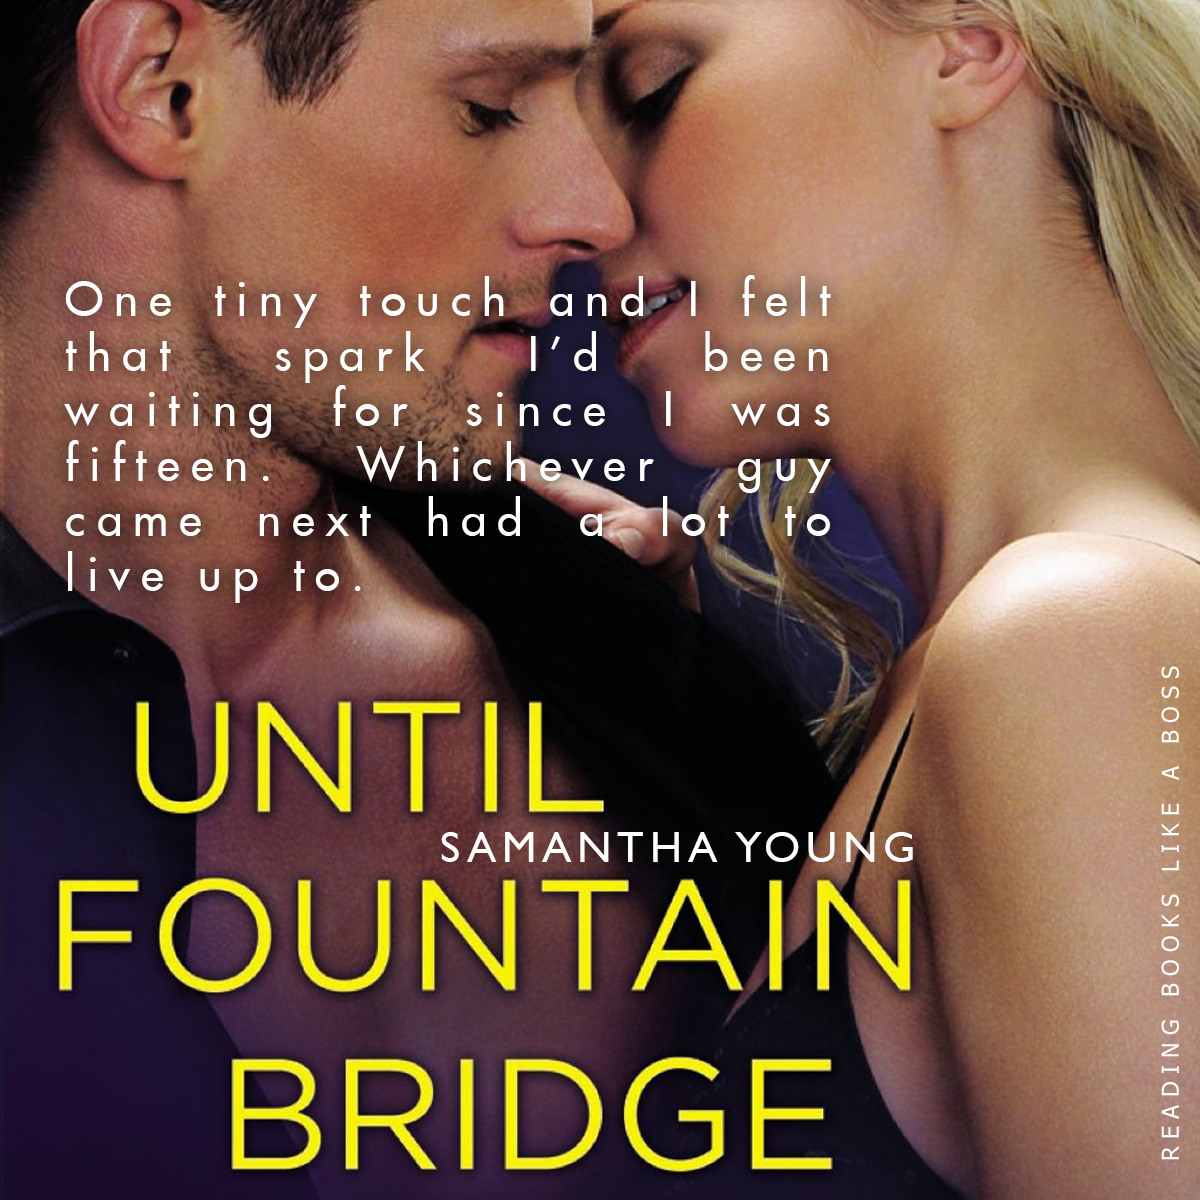 Until Fountain Bridge by Samantha Young